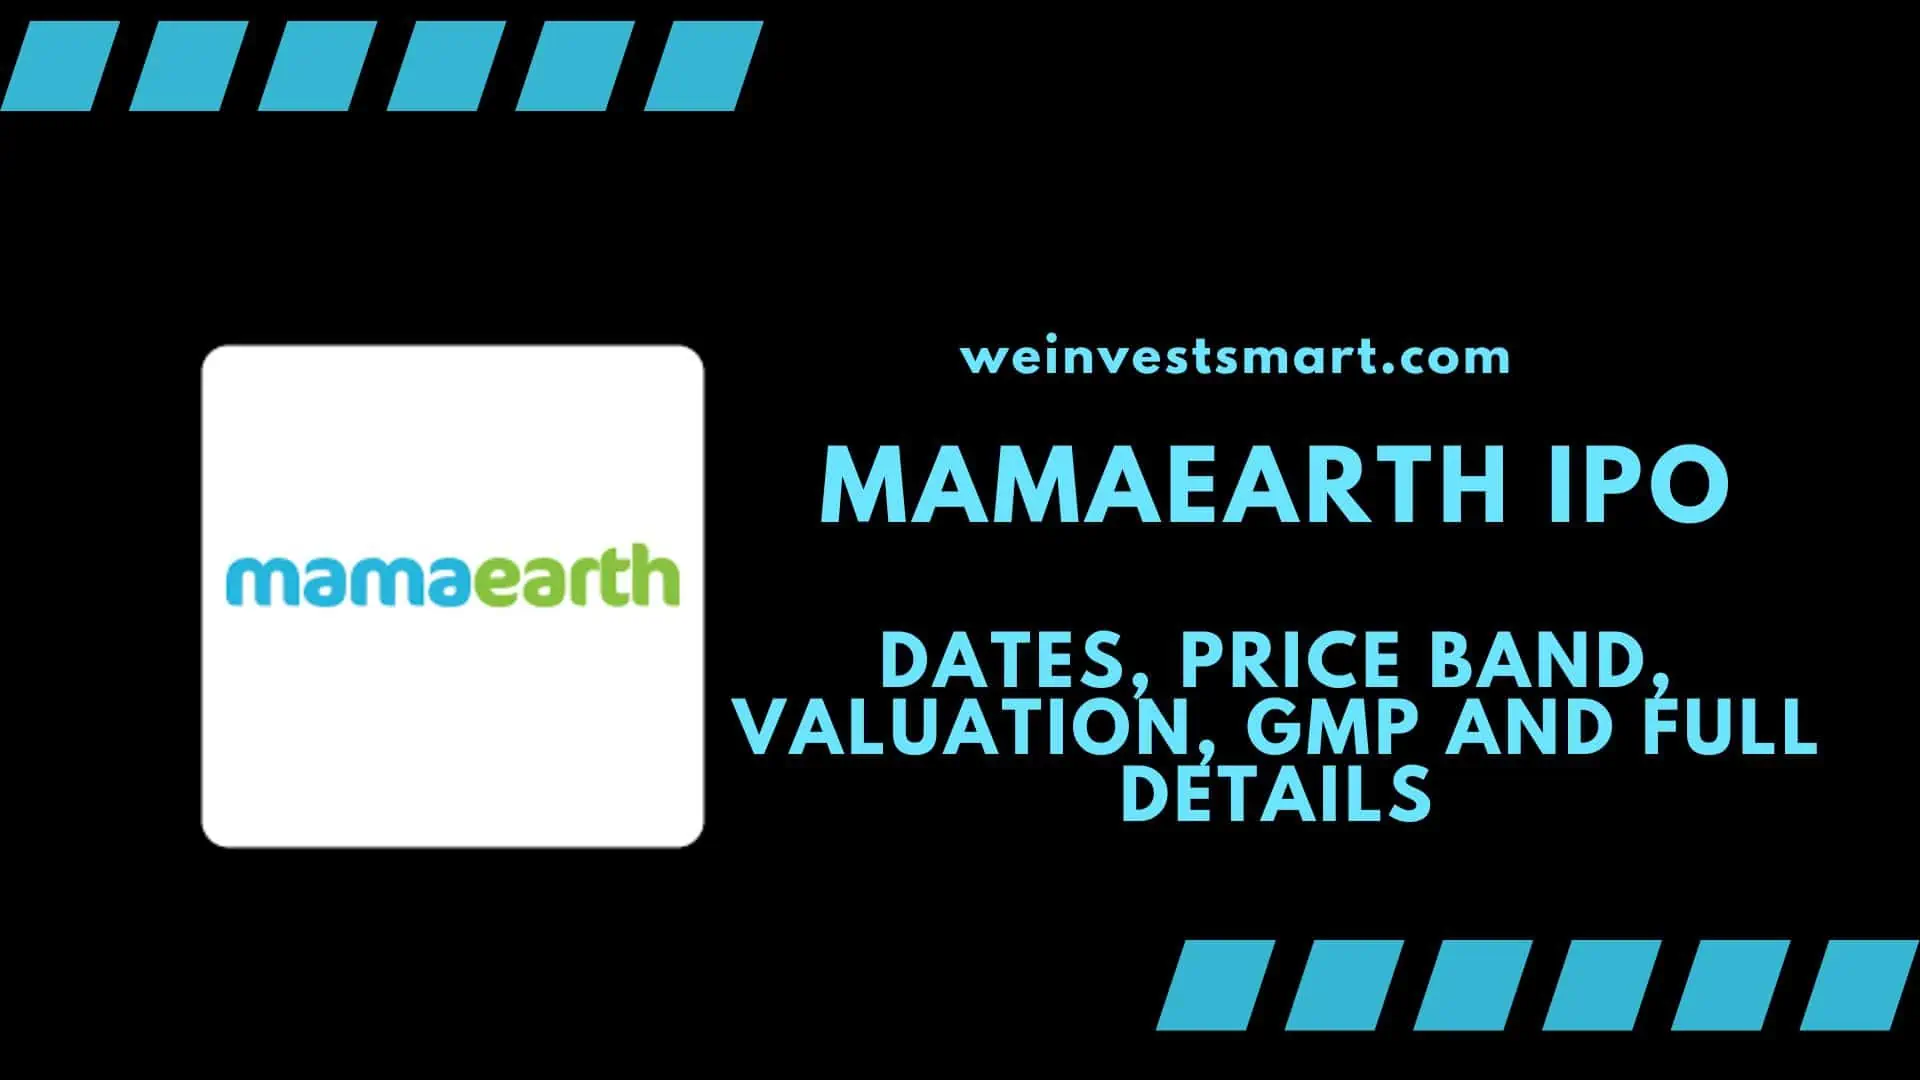 MamaEarth IPO Dates, Price Band, Valuation, GMP and Full Details